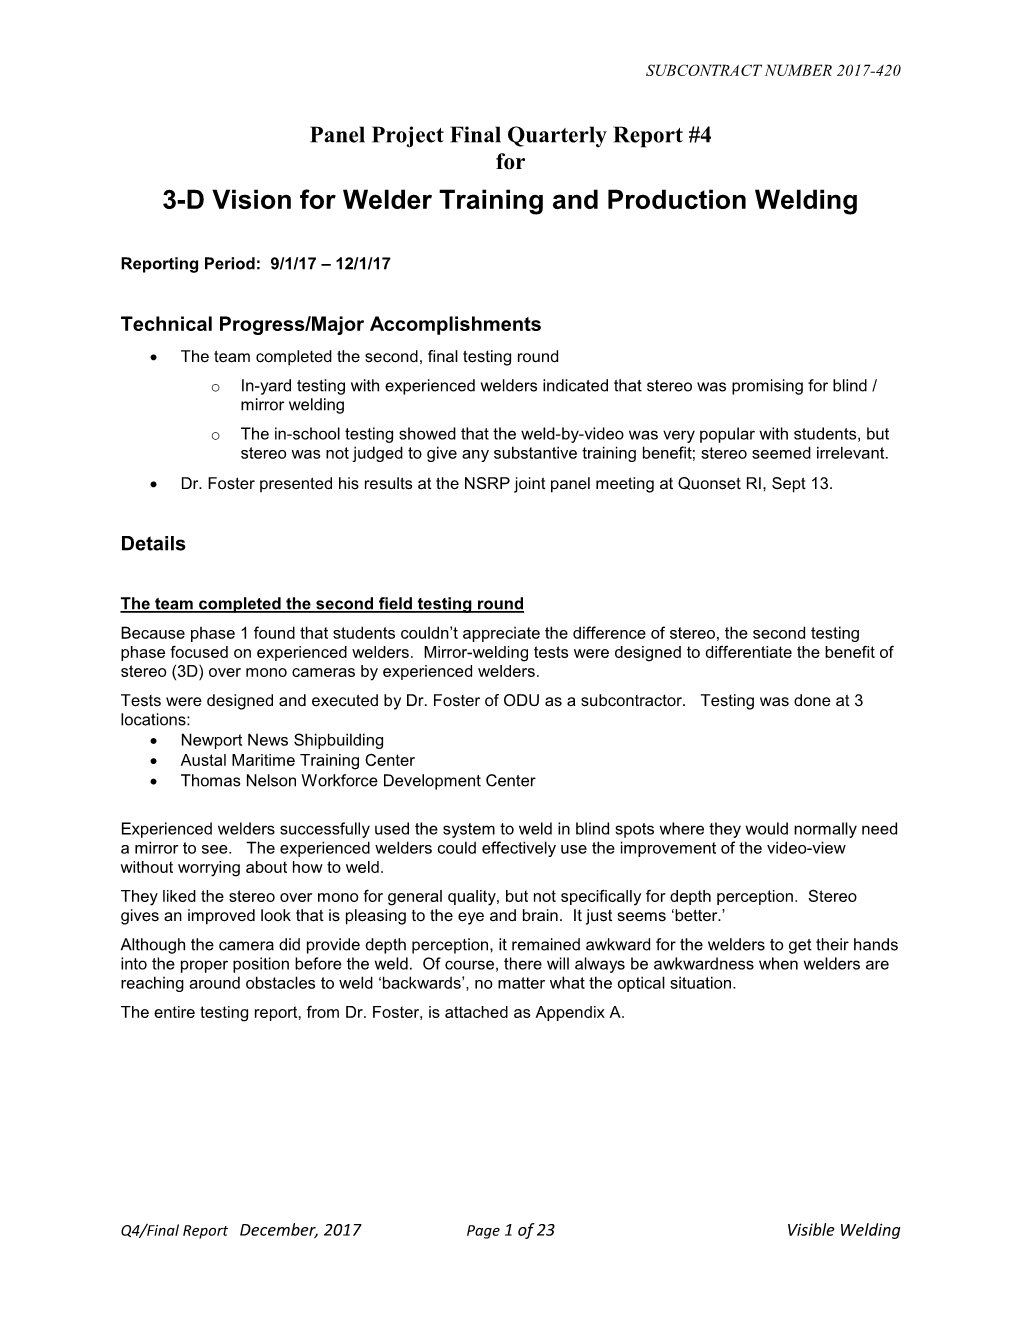 3-D Vision for Welder Training and Production Welding